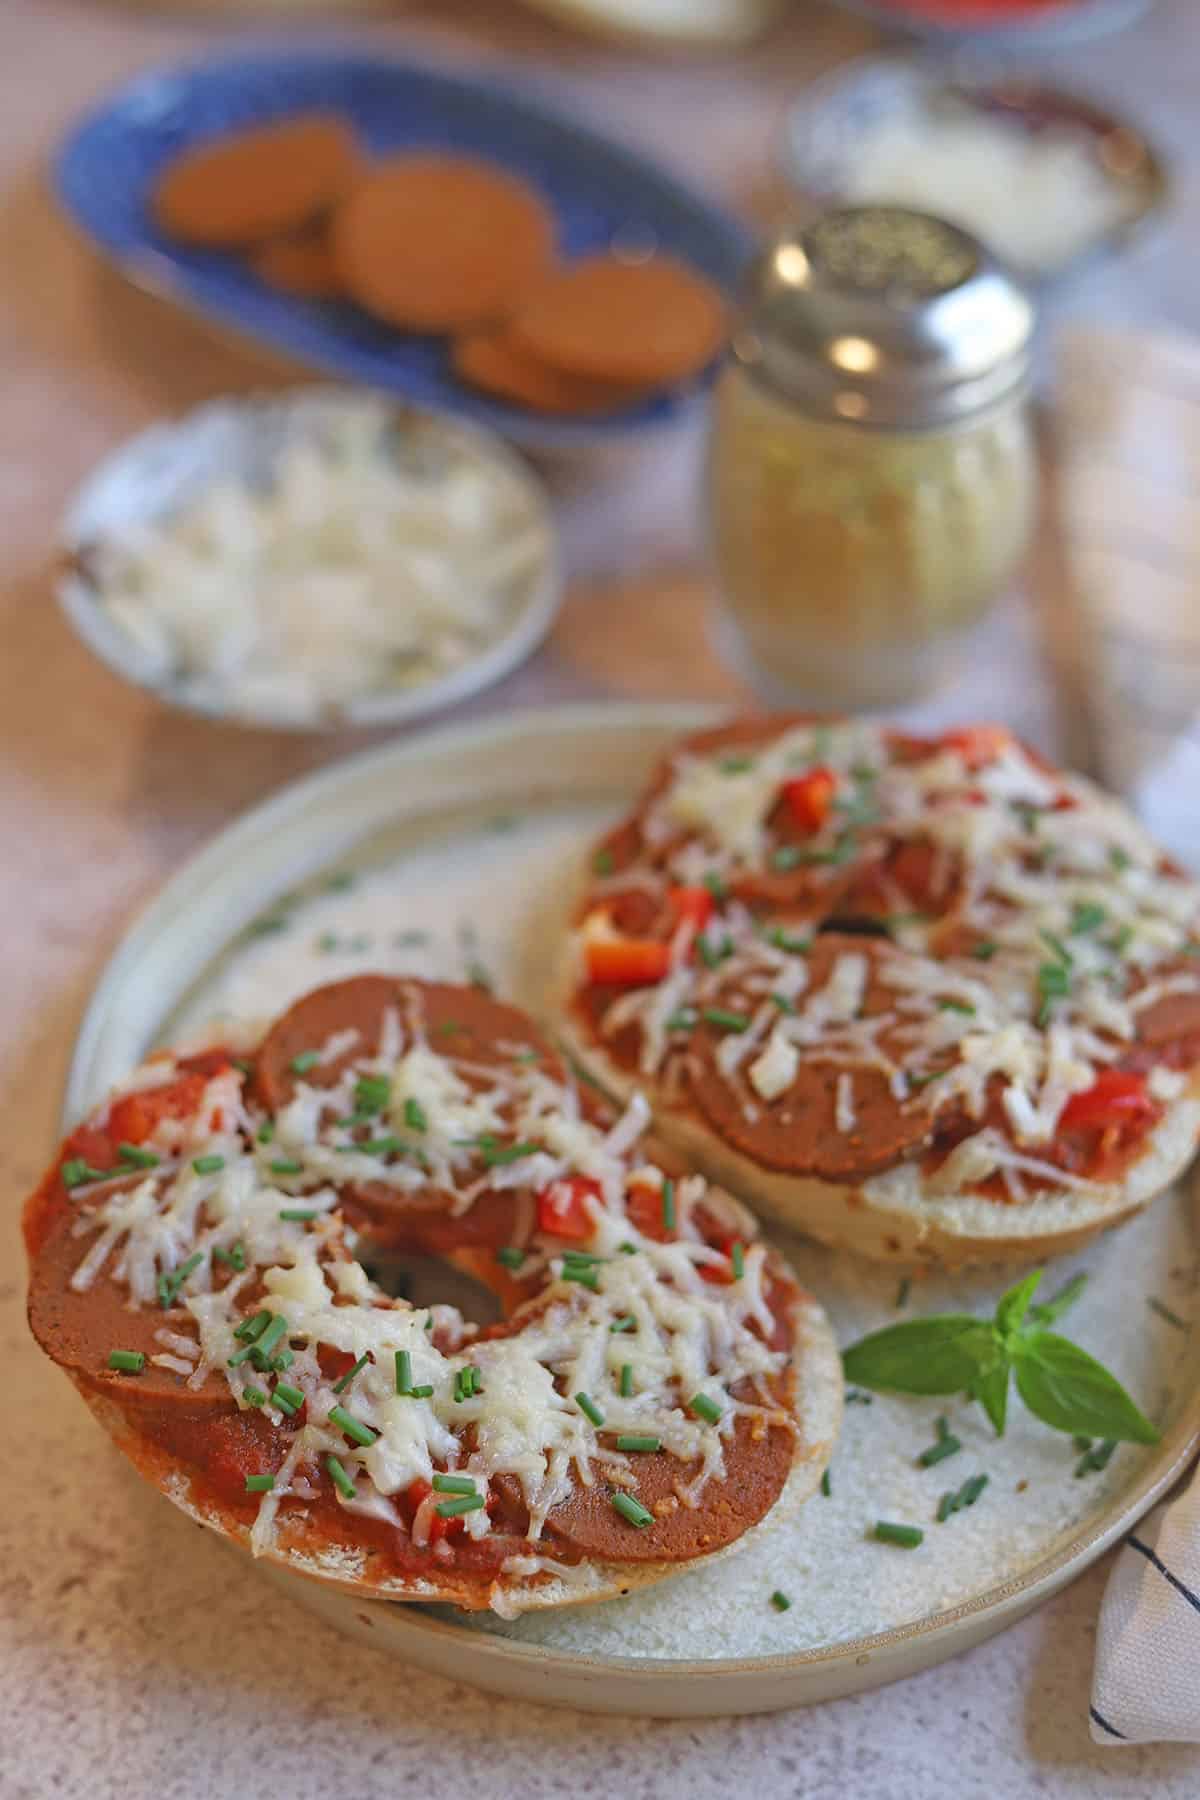 Air fryer pizza bagels on plate by parmesan cheese shaker.